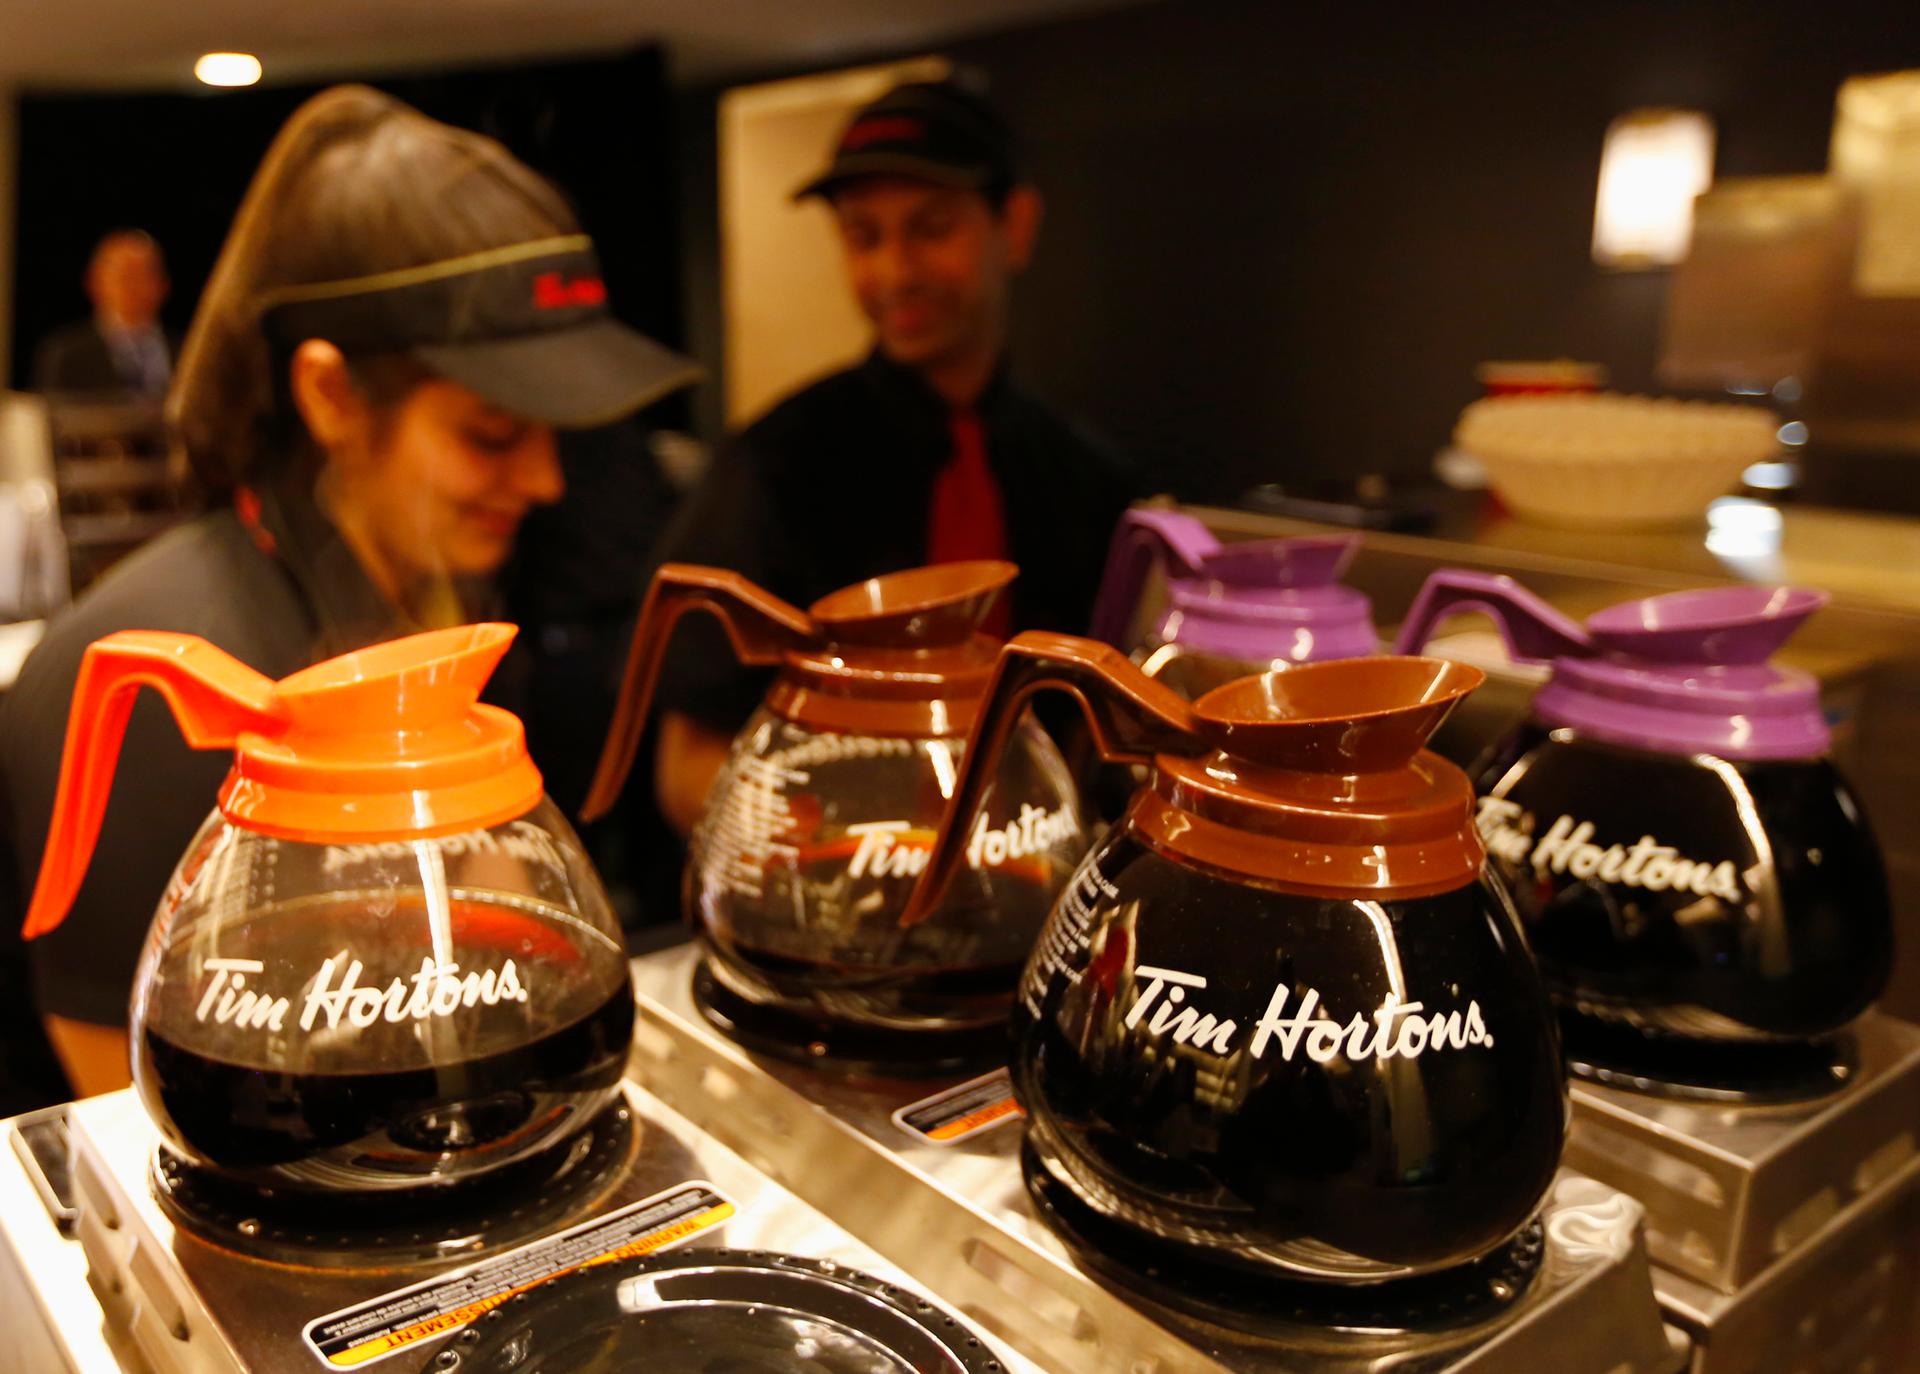 Tim Hortons employees prepare coffee before the company's annual general meeting in Toronto on May 8, 2014.